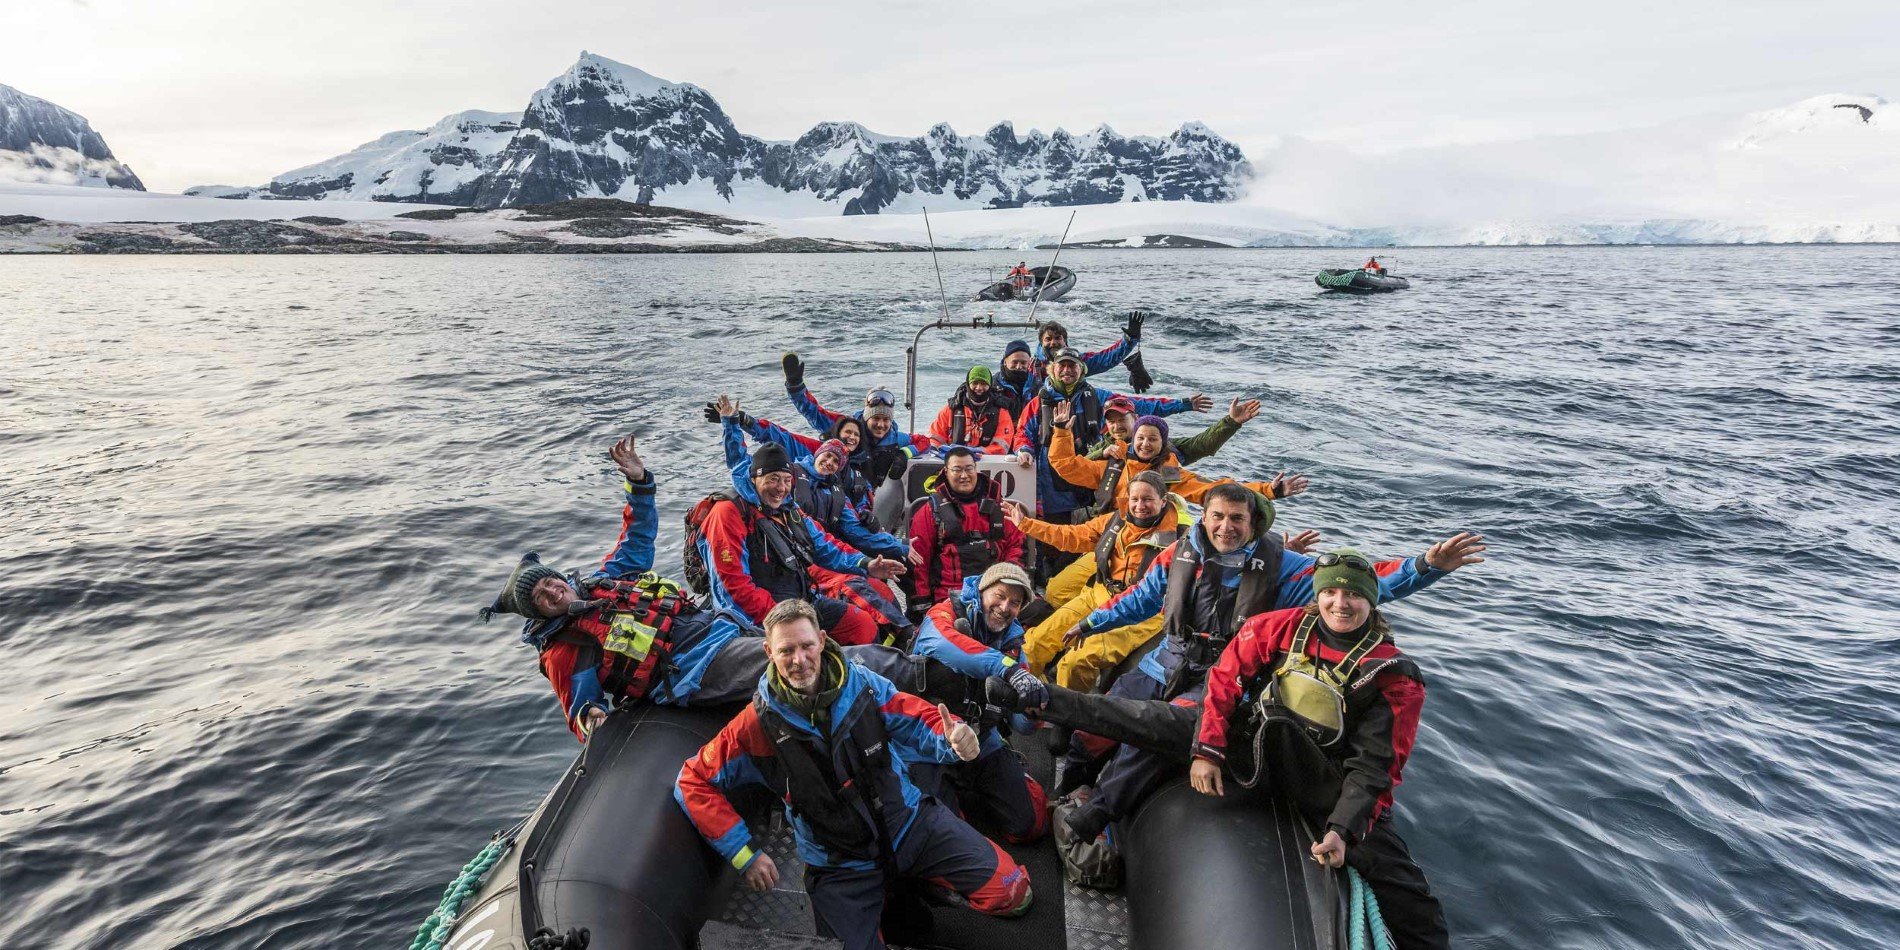 The Expedition Team cruising at Damoy Point, Antarctica